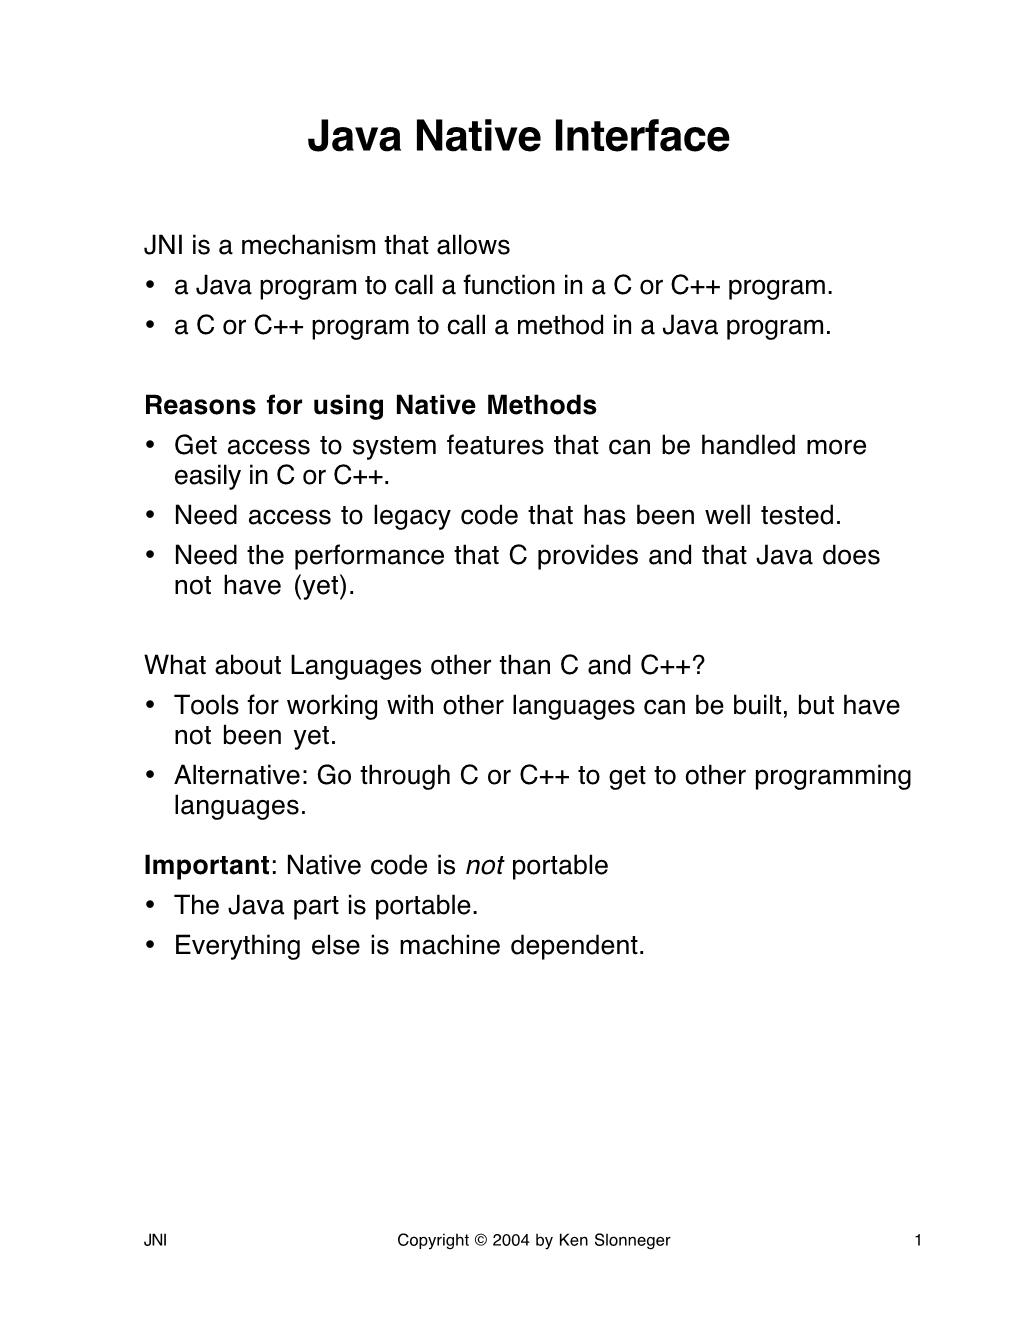 JNI Is a Mechanism That Allows • a Java Program to Call a Function in a C Or C++ Program